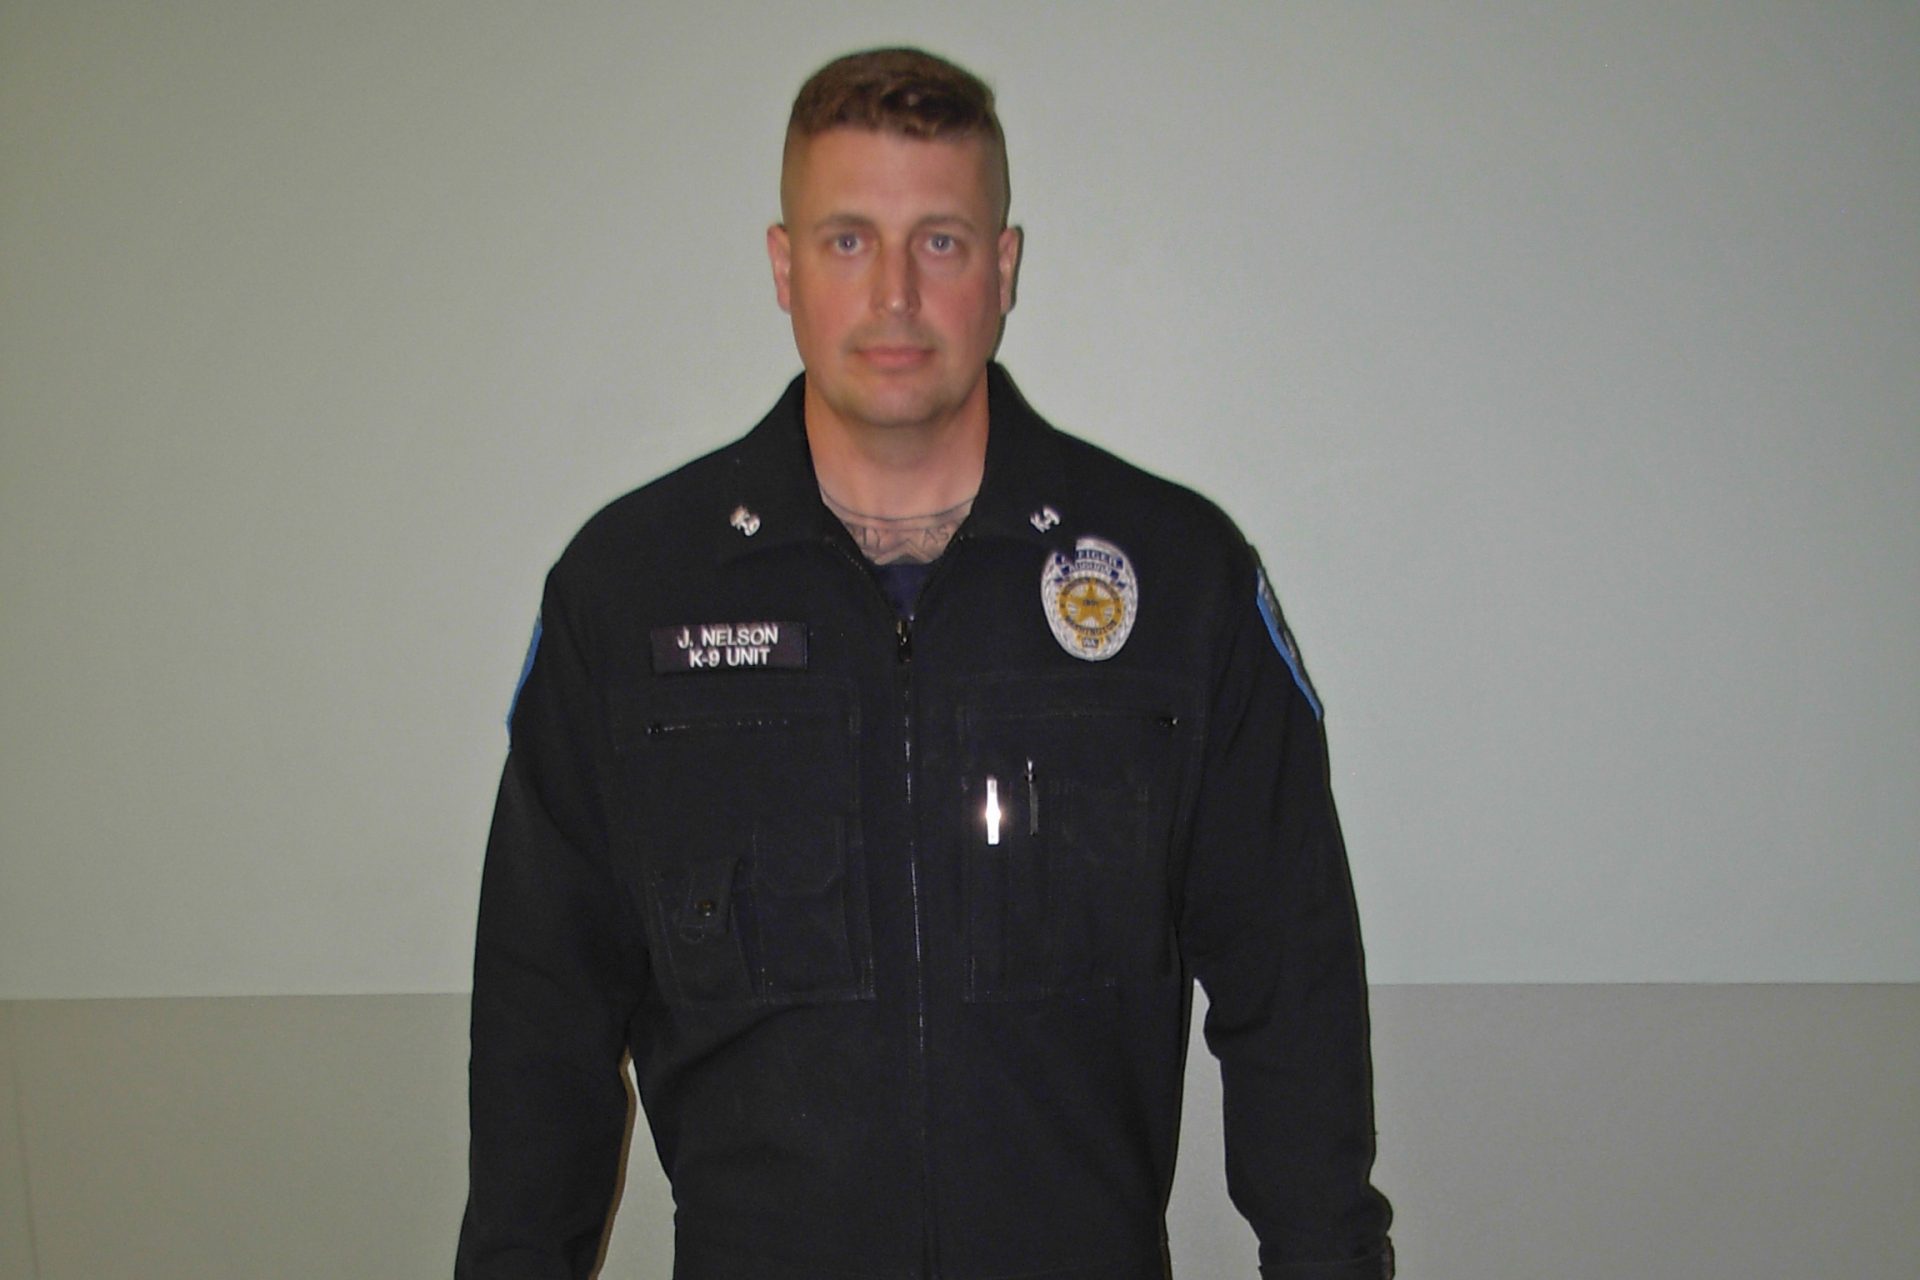 In this photo provided by the Auburn Police Department via the Port of Seattle Police Department, Auburn police Officer Jeff Nelson is shown.